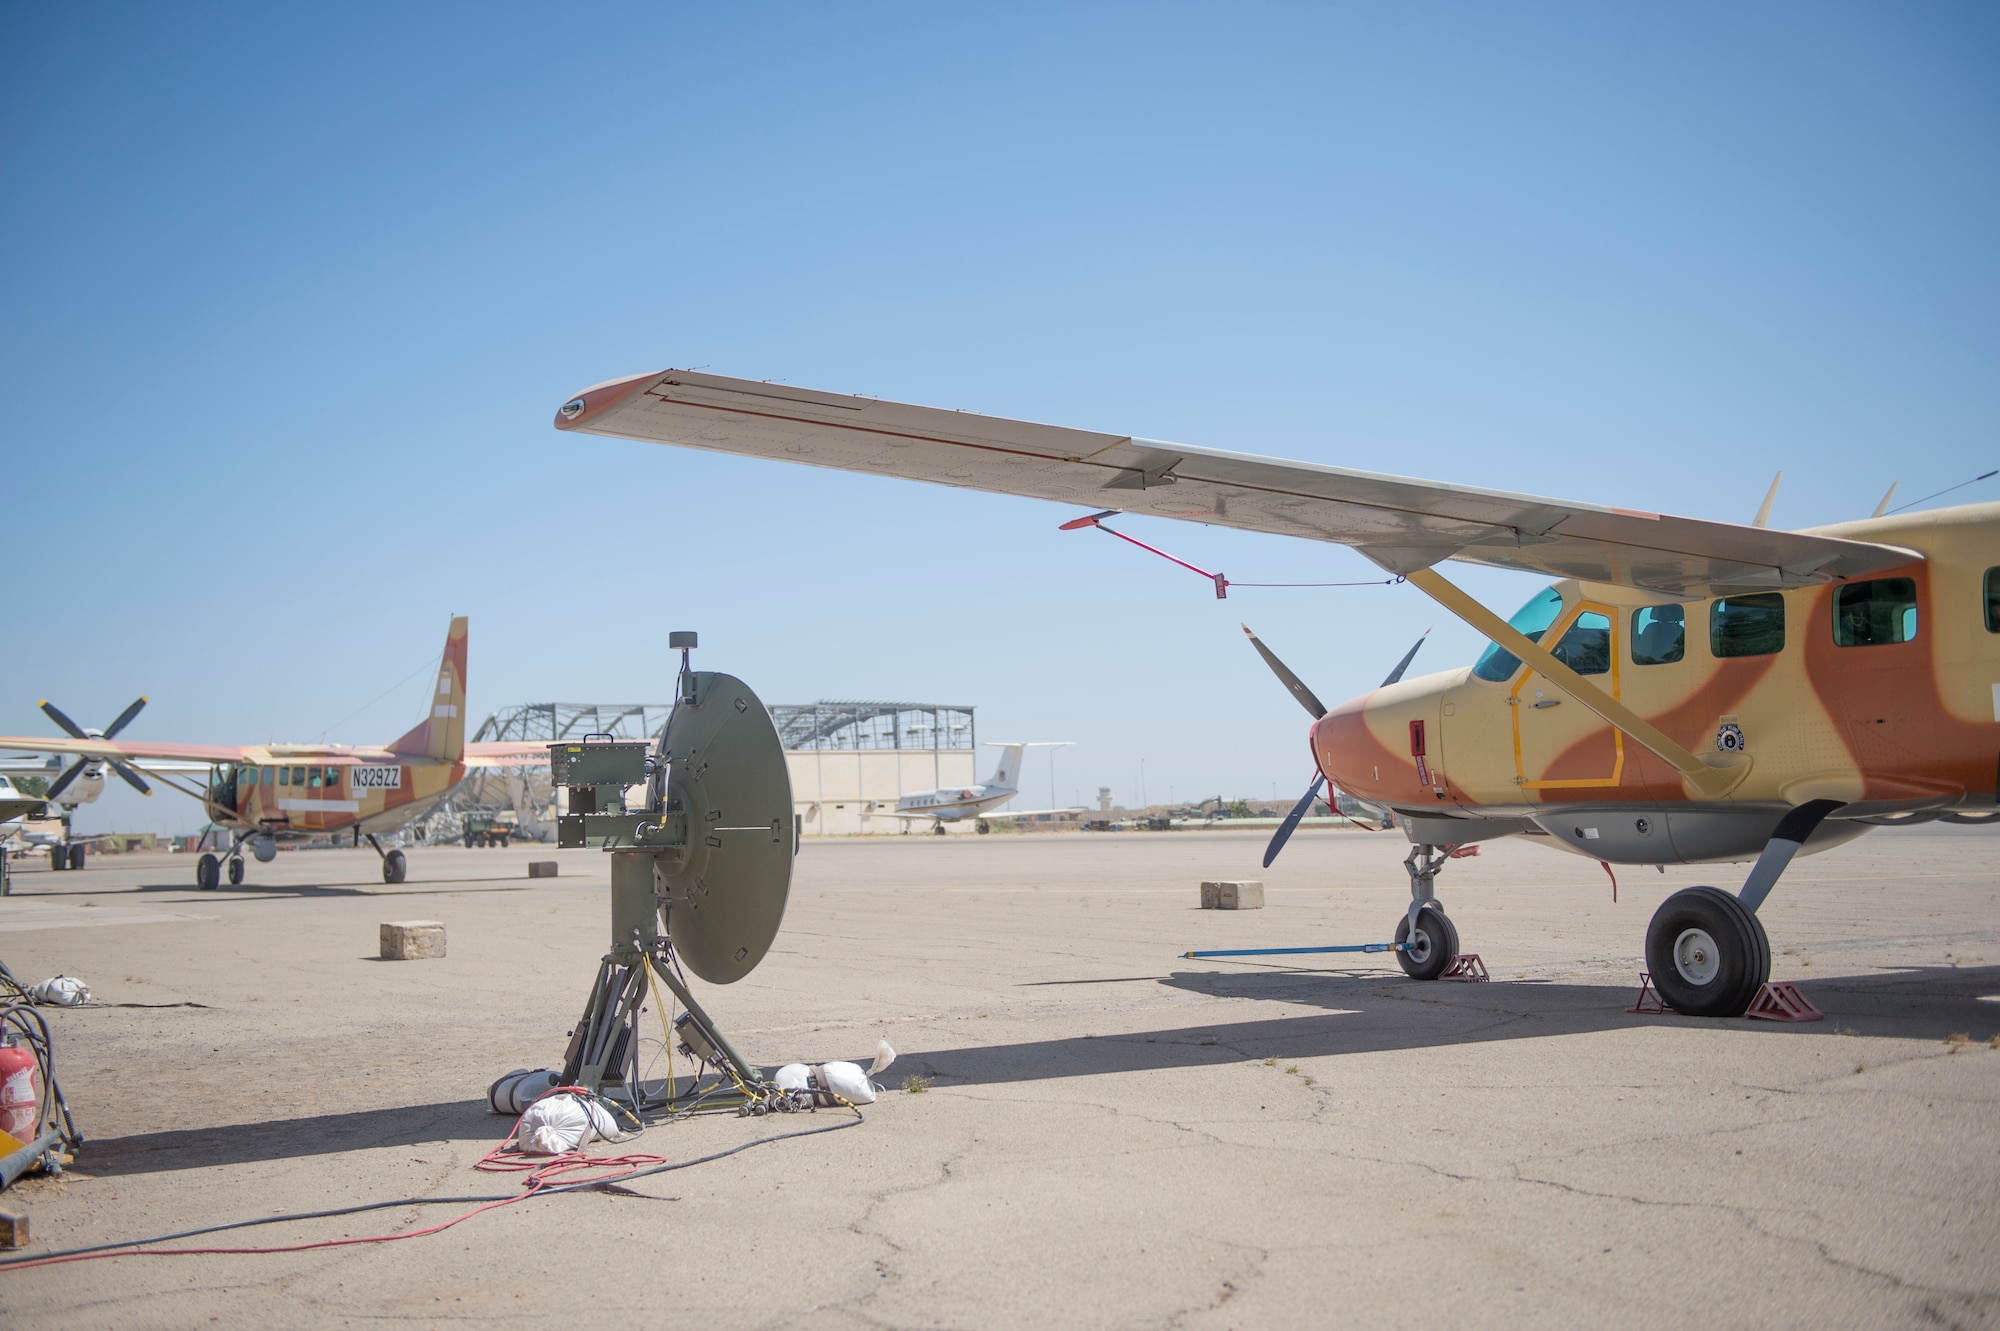 Two C-208 aircraft are parked on the flightline at Adjikossei Air Base, Chad, January 18, 2018.